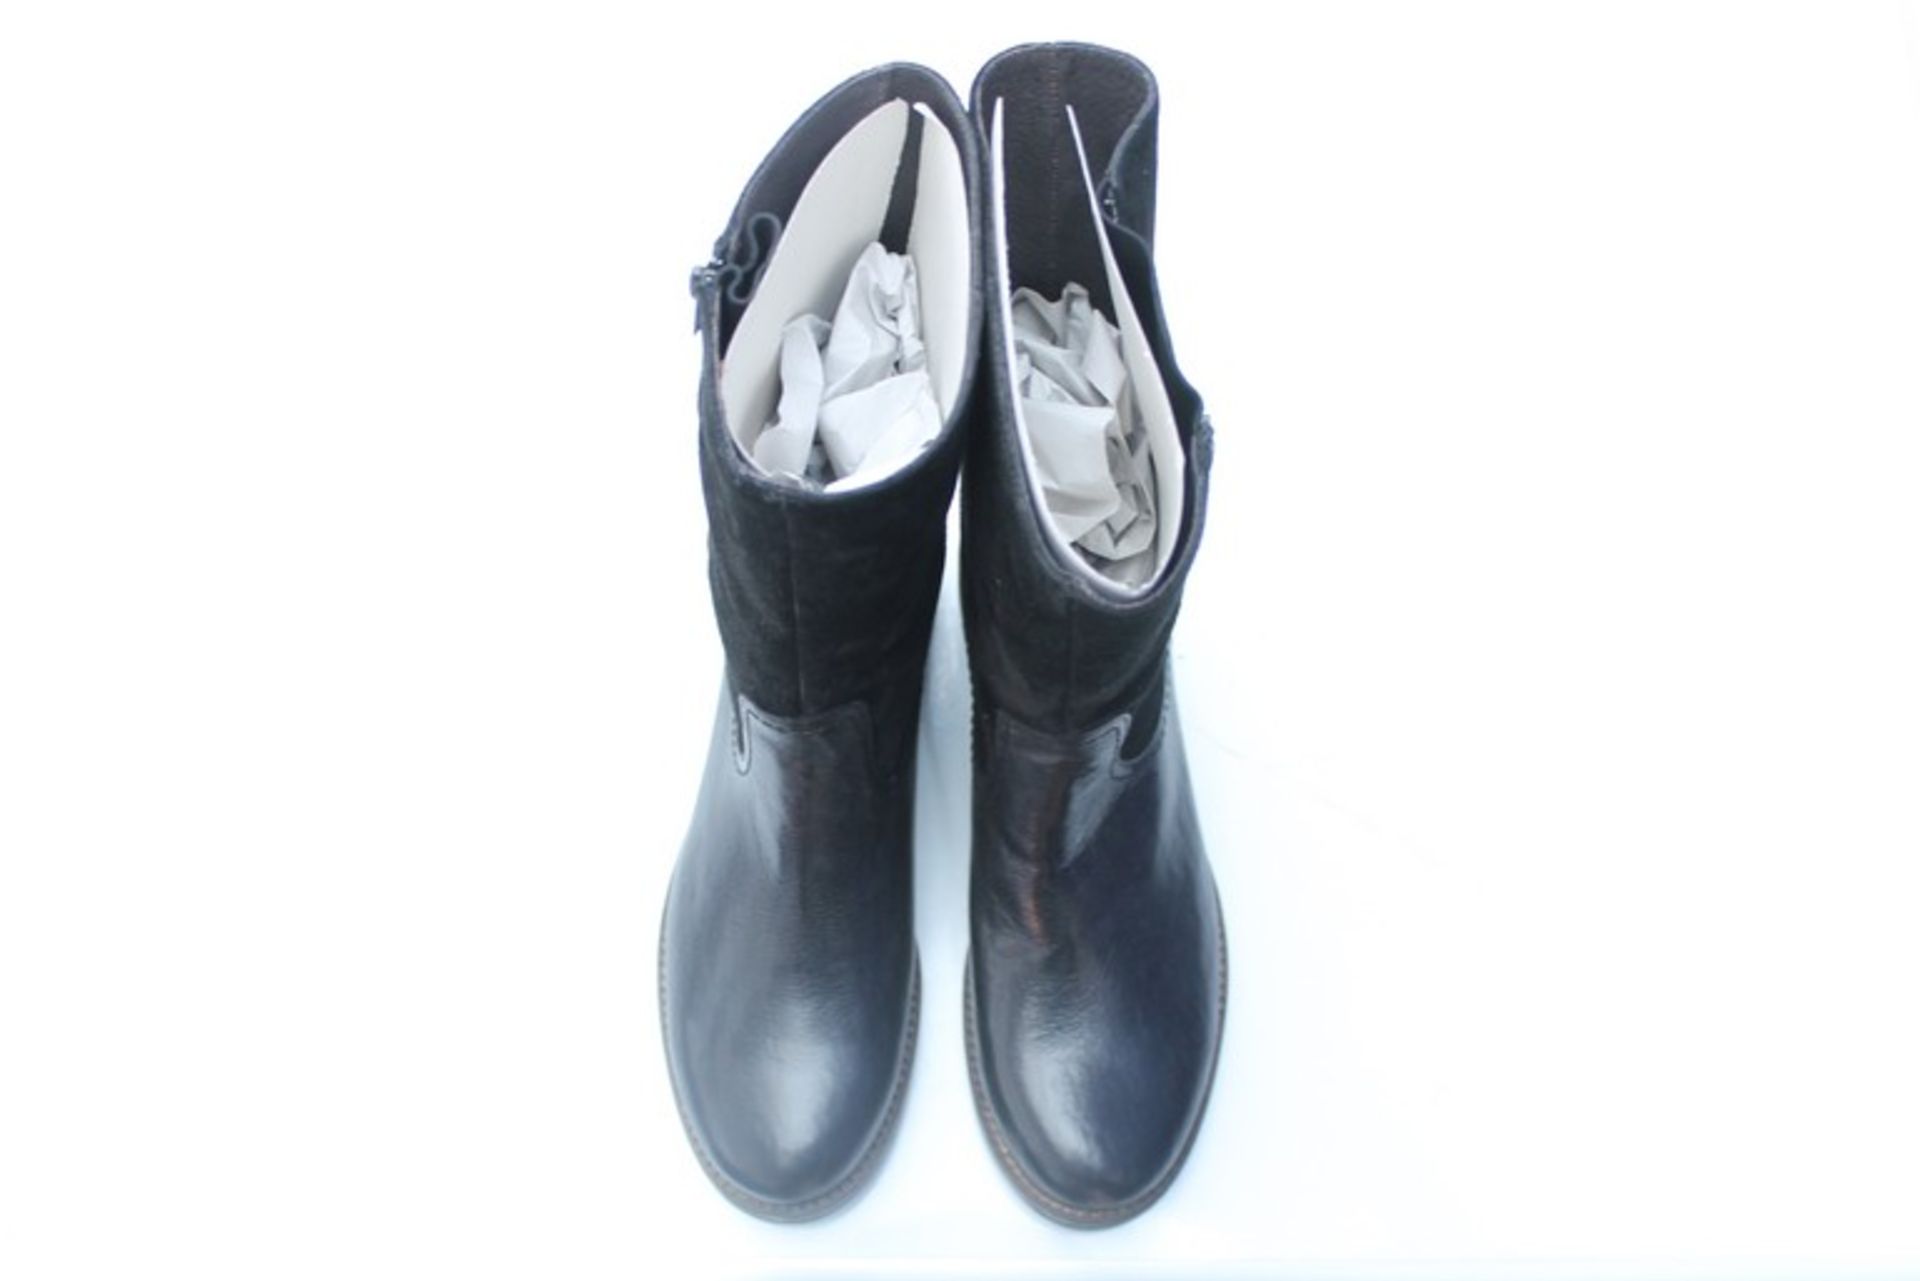 1 x BOXED PAIR OF SIZE 8 BLACK DESIGNER BOOTS RRP £140  *PLEASE NOTE THAT THE BID PRICE IS